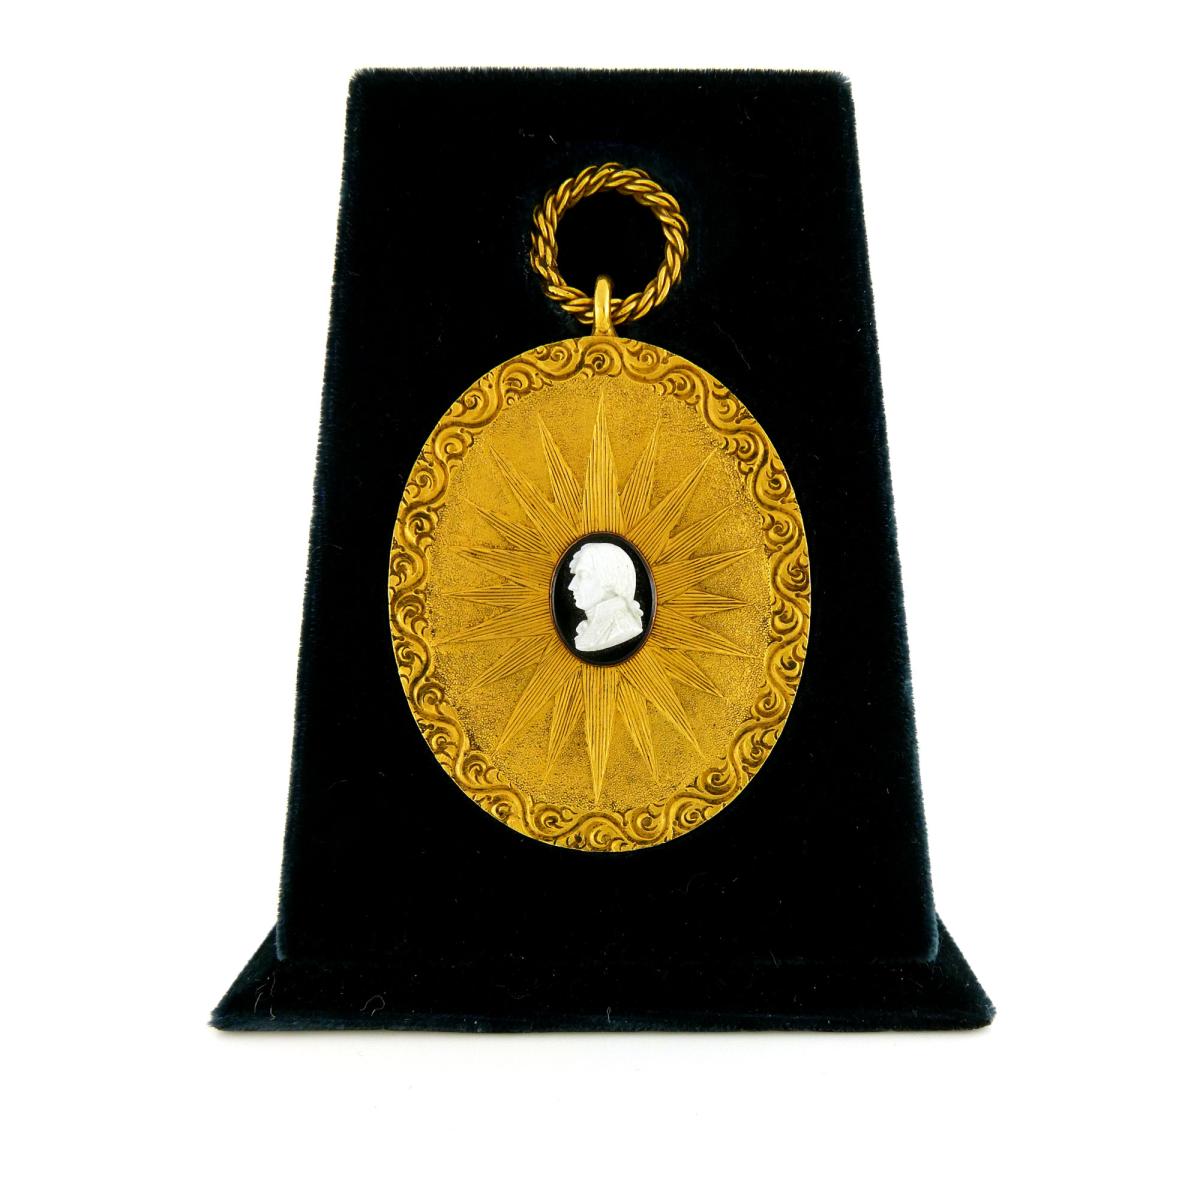 An Admiral Lord Nelson Ormolu Mounted Tassie Cameo, 1810